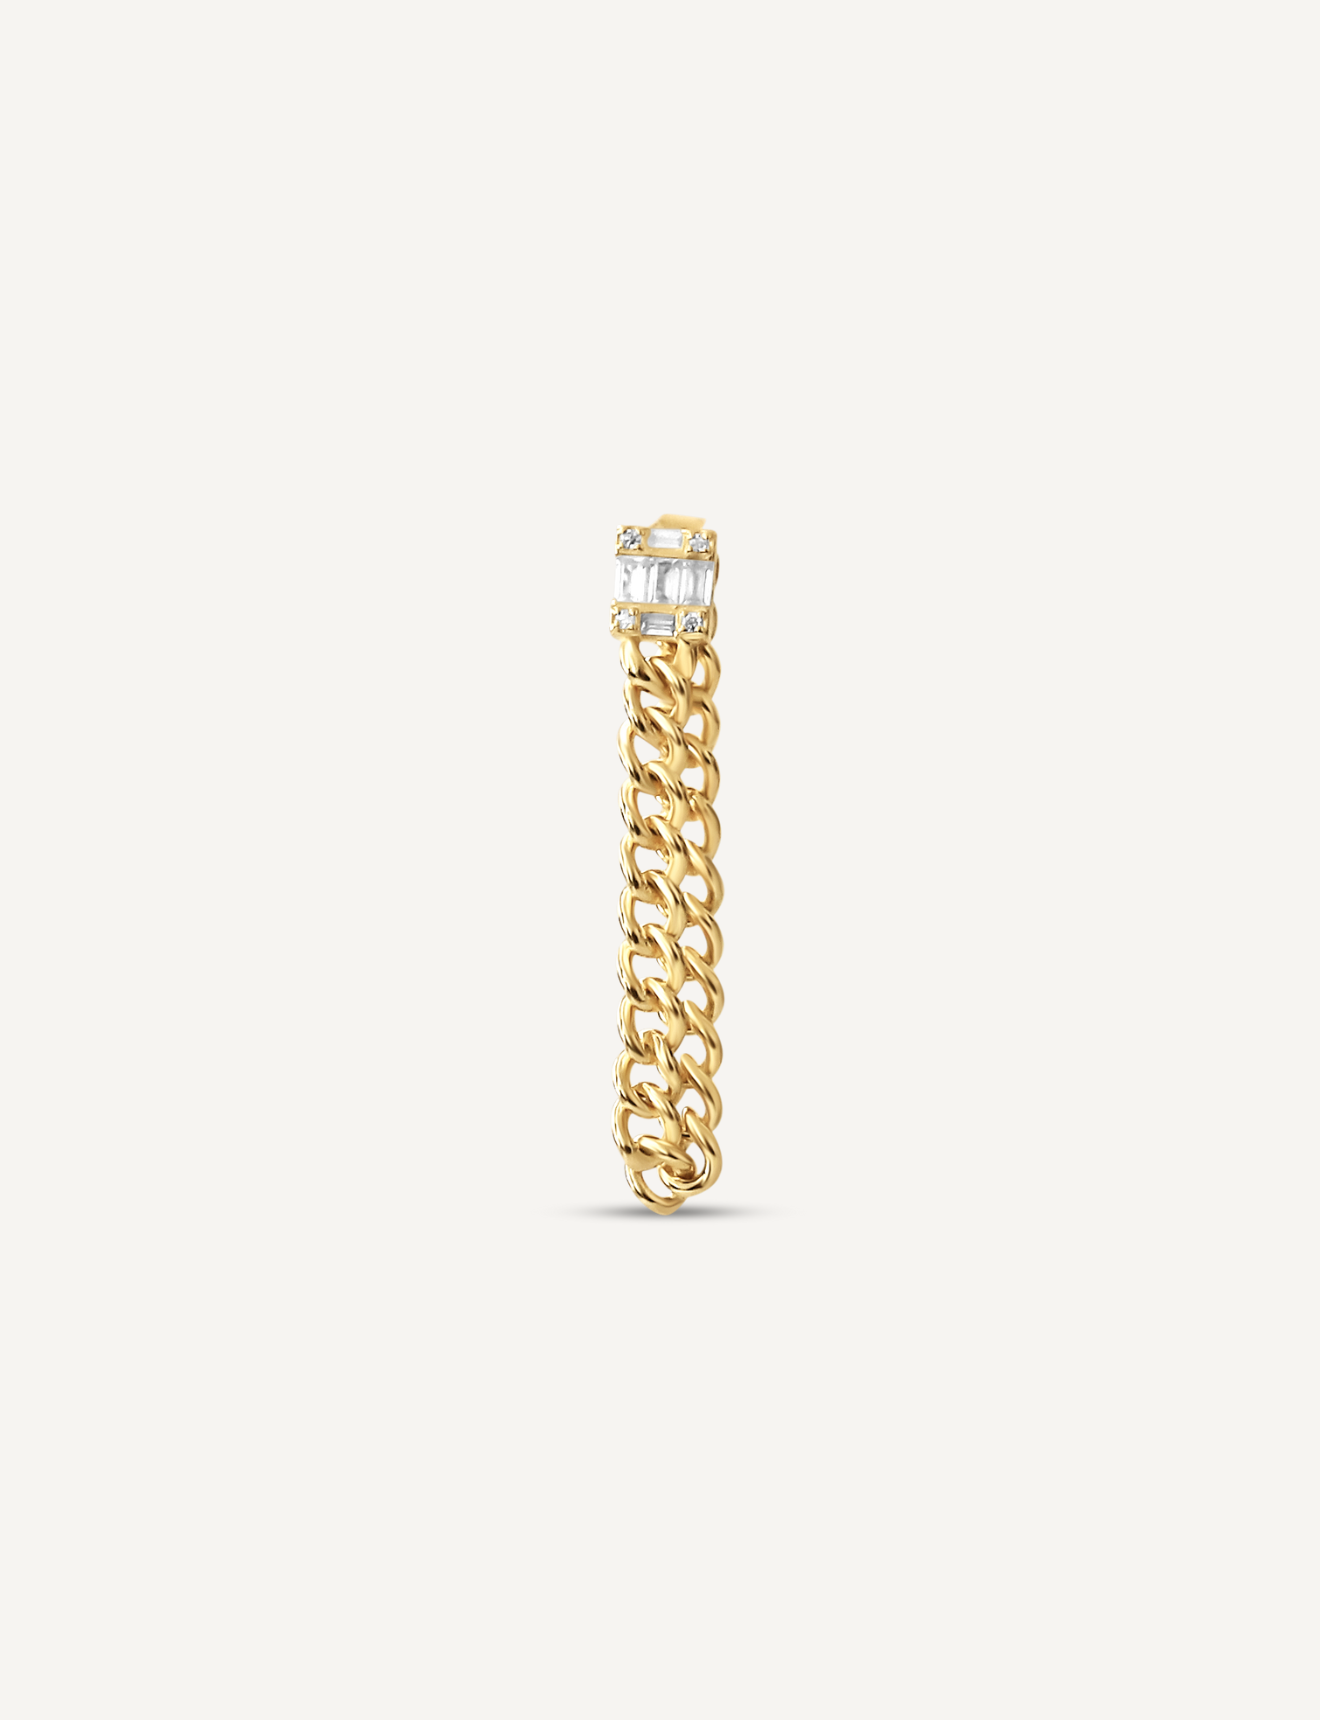 18K Gold Filled chain earring connected to a square cut clear Cubic Zirconia stud.